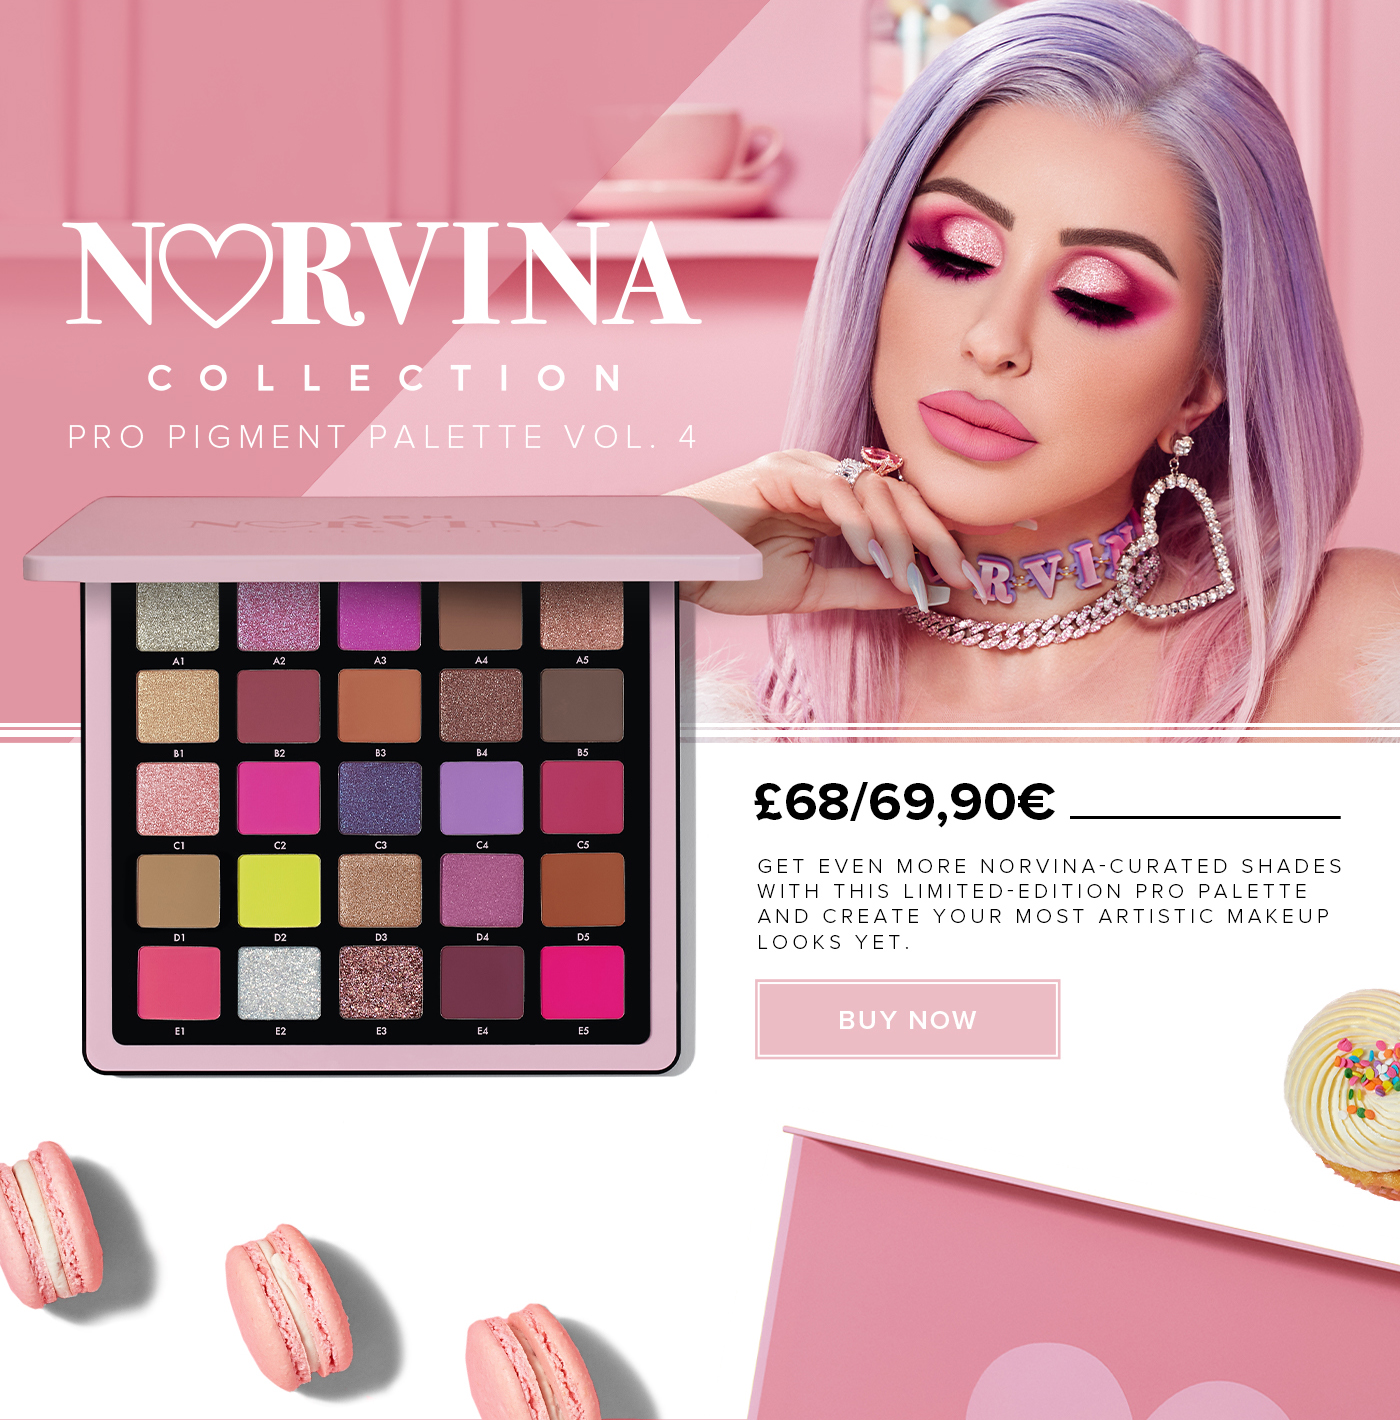 NORVINA COLLECTION - PRO PIGMENT PALETTE VOL. 4 - Get even more Norvina-curated shades with this limited-edition pro palette and create your most artistic makeup looks yet. Buy Now.